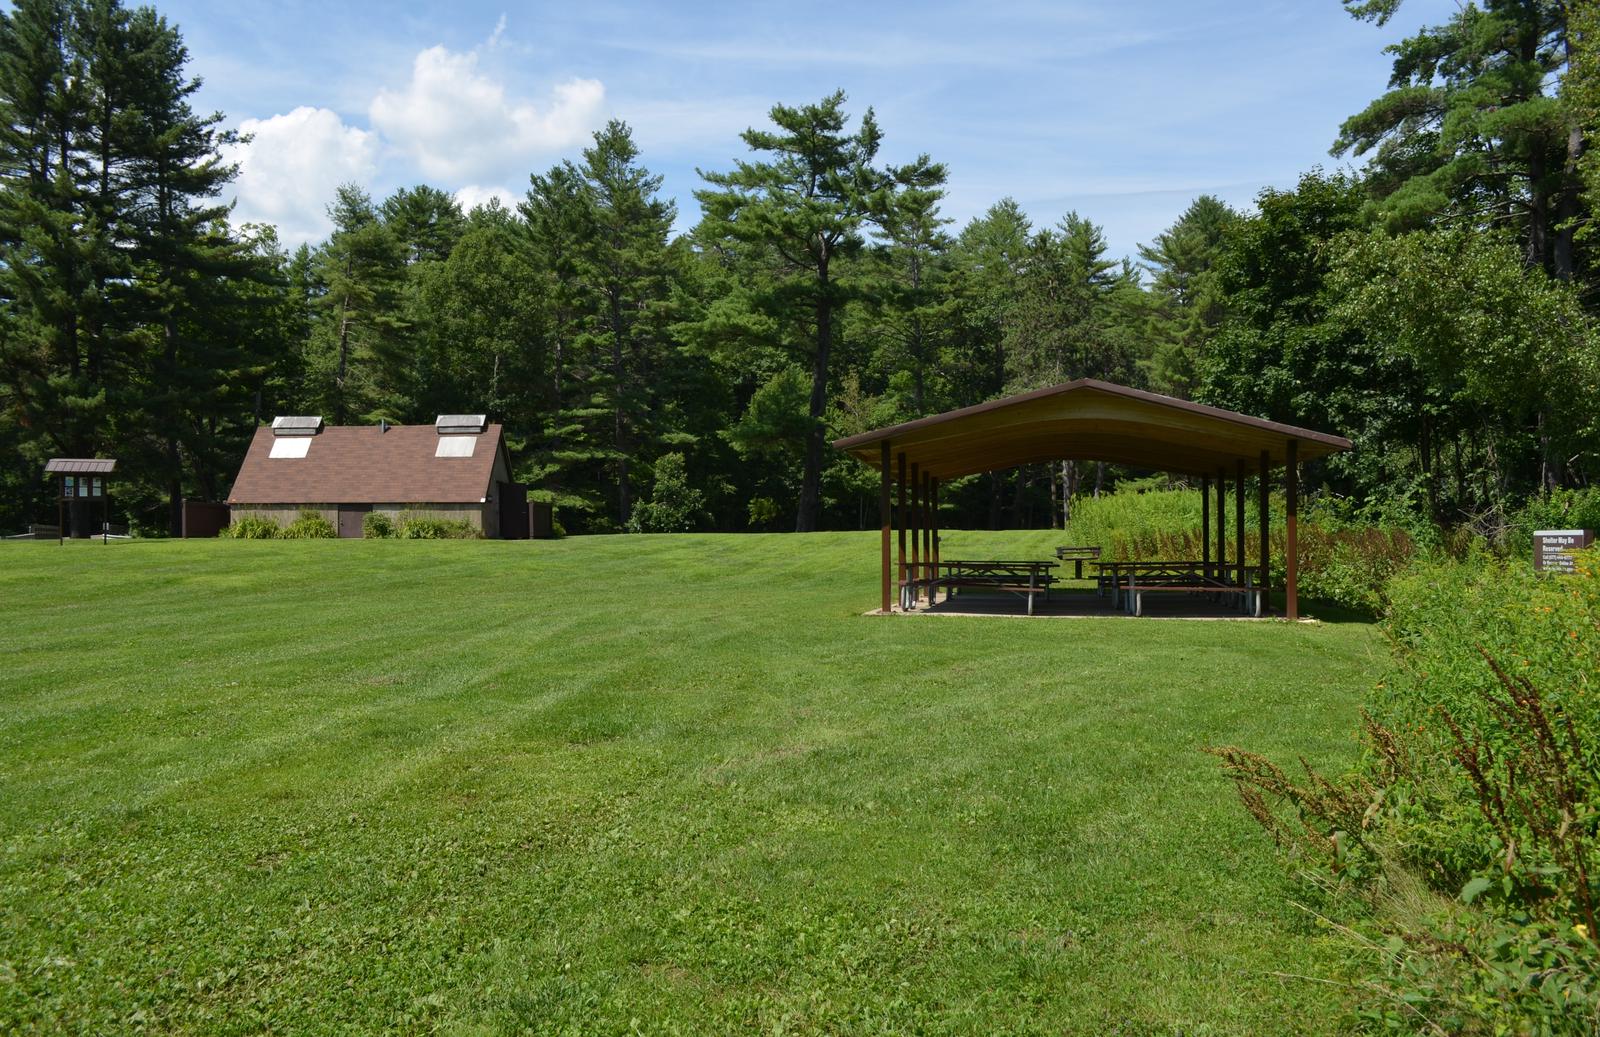 Elm shelter at Otter Brook Lake, with lawn area, and restroom building in backgroundElm shelter at Otter Brook Lake